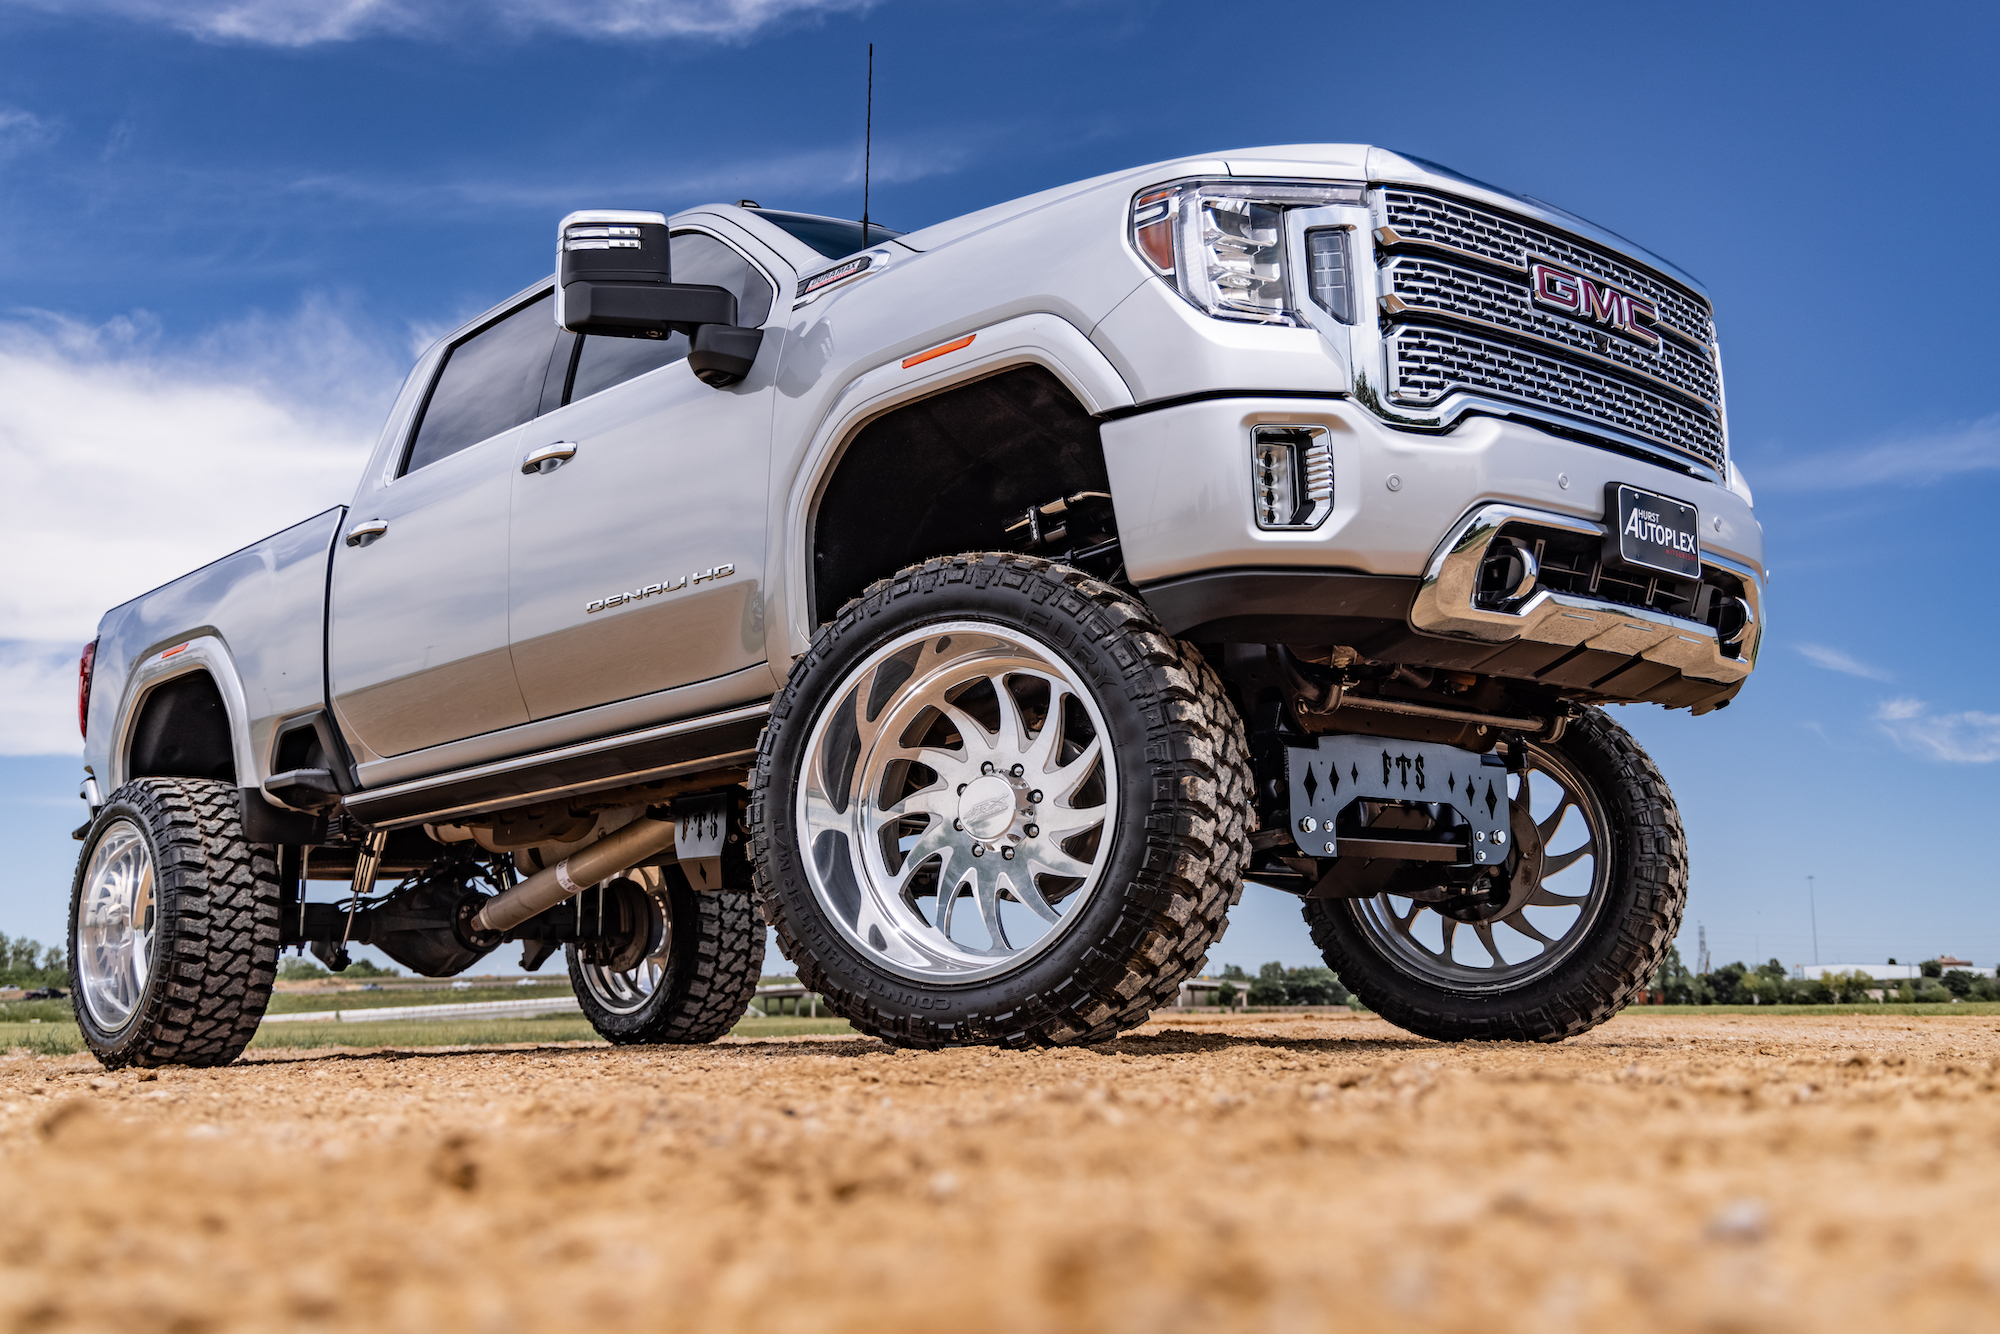 2021 Gmc Sierra 2500 Hd With 26x14 Inch Jtx Forged Wheels Jtx Forged